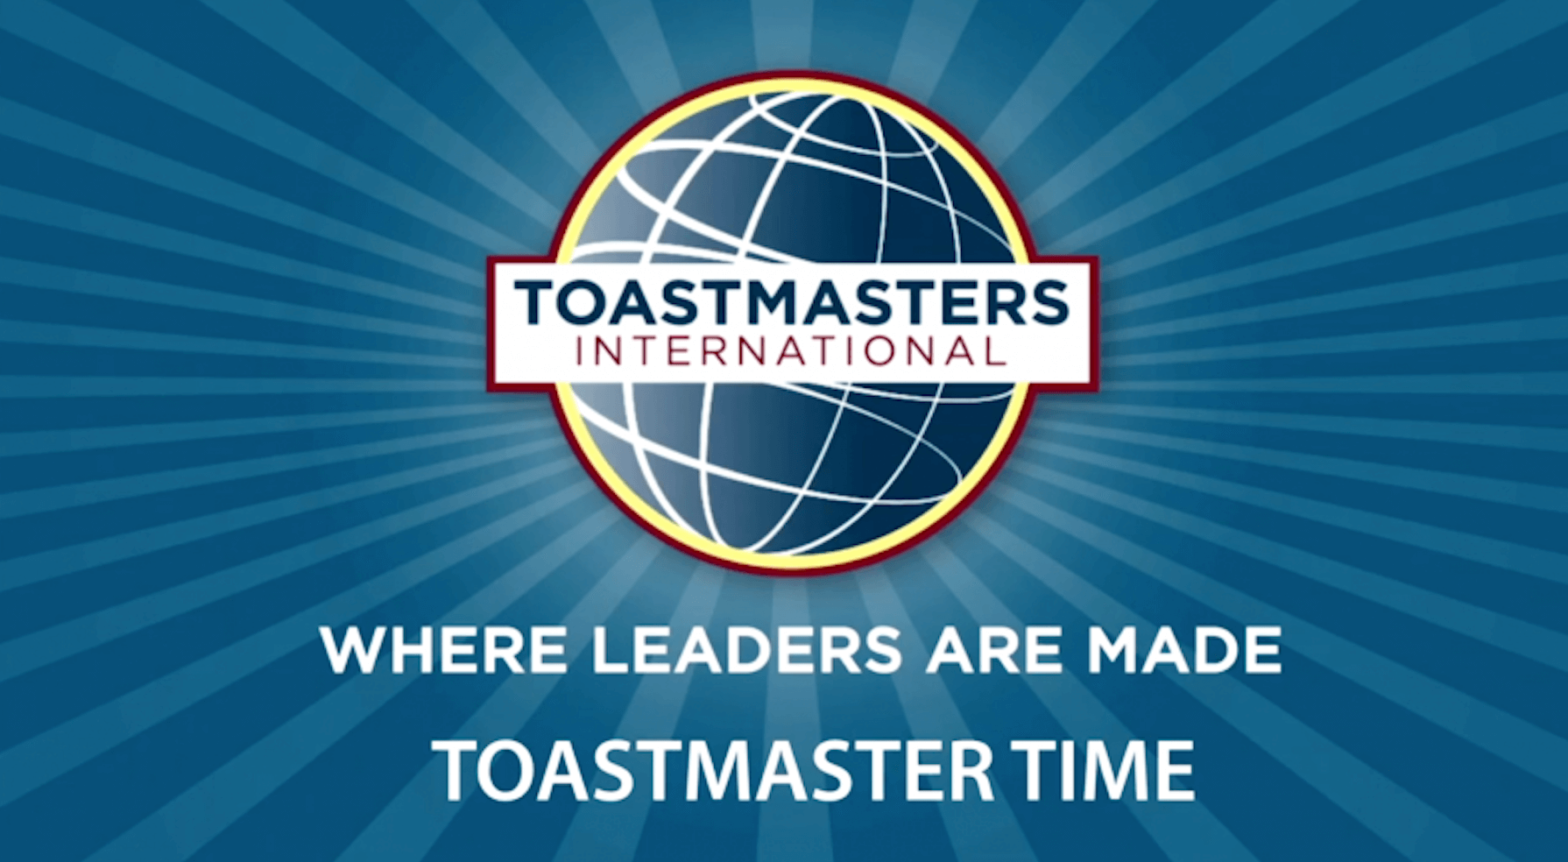 Toastmasters Everything You Need To Know Before Joining Keynote Speaker